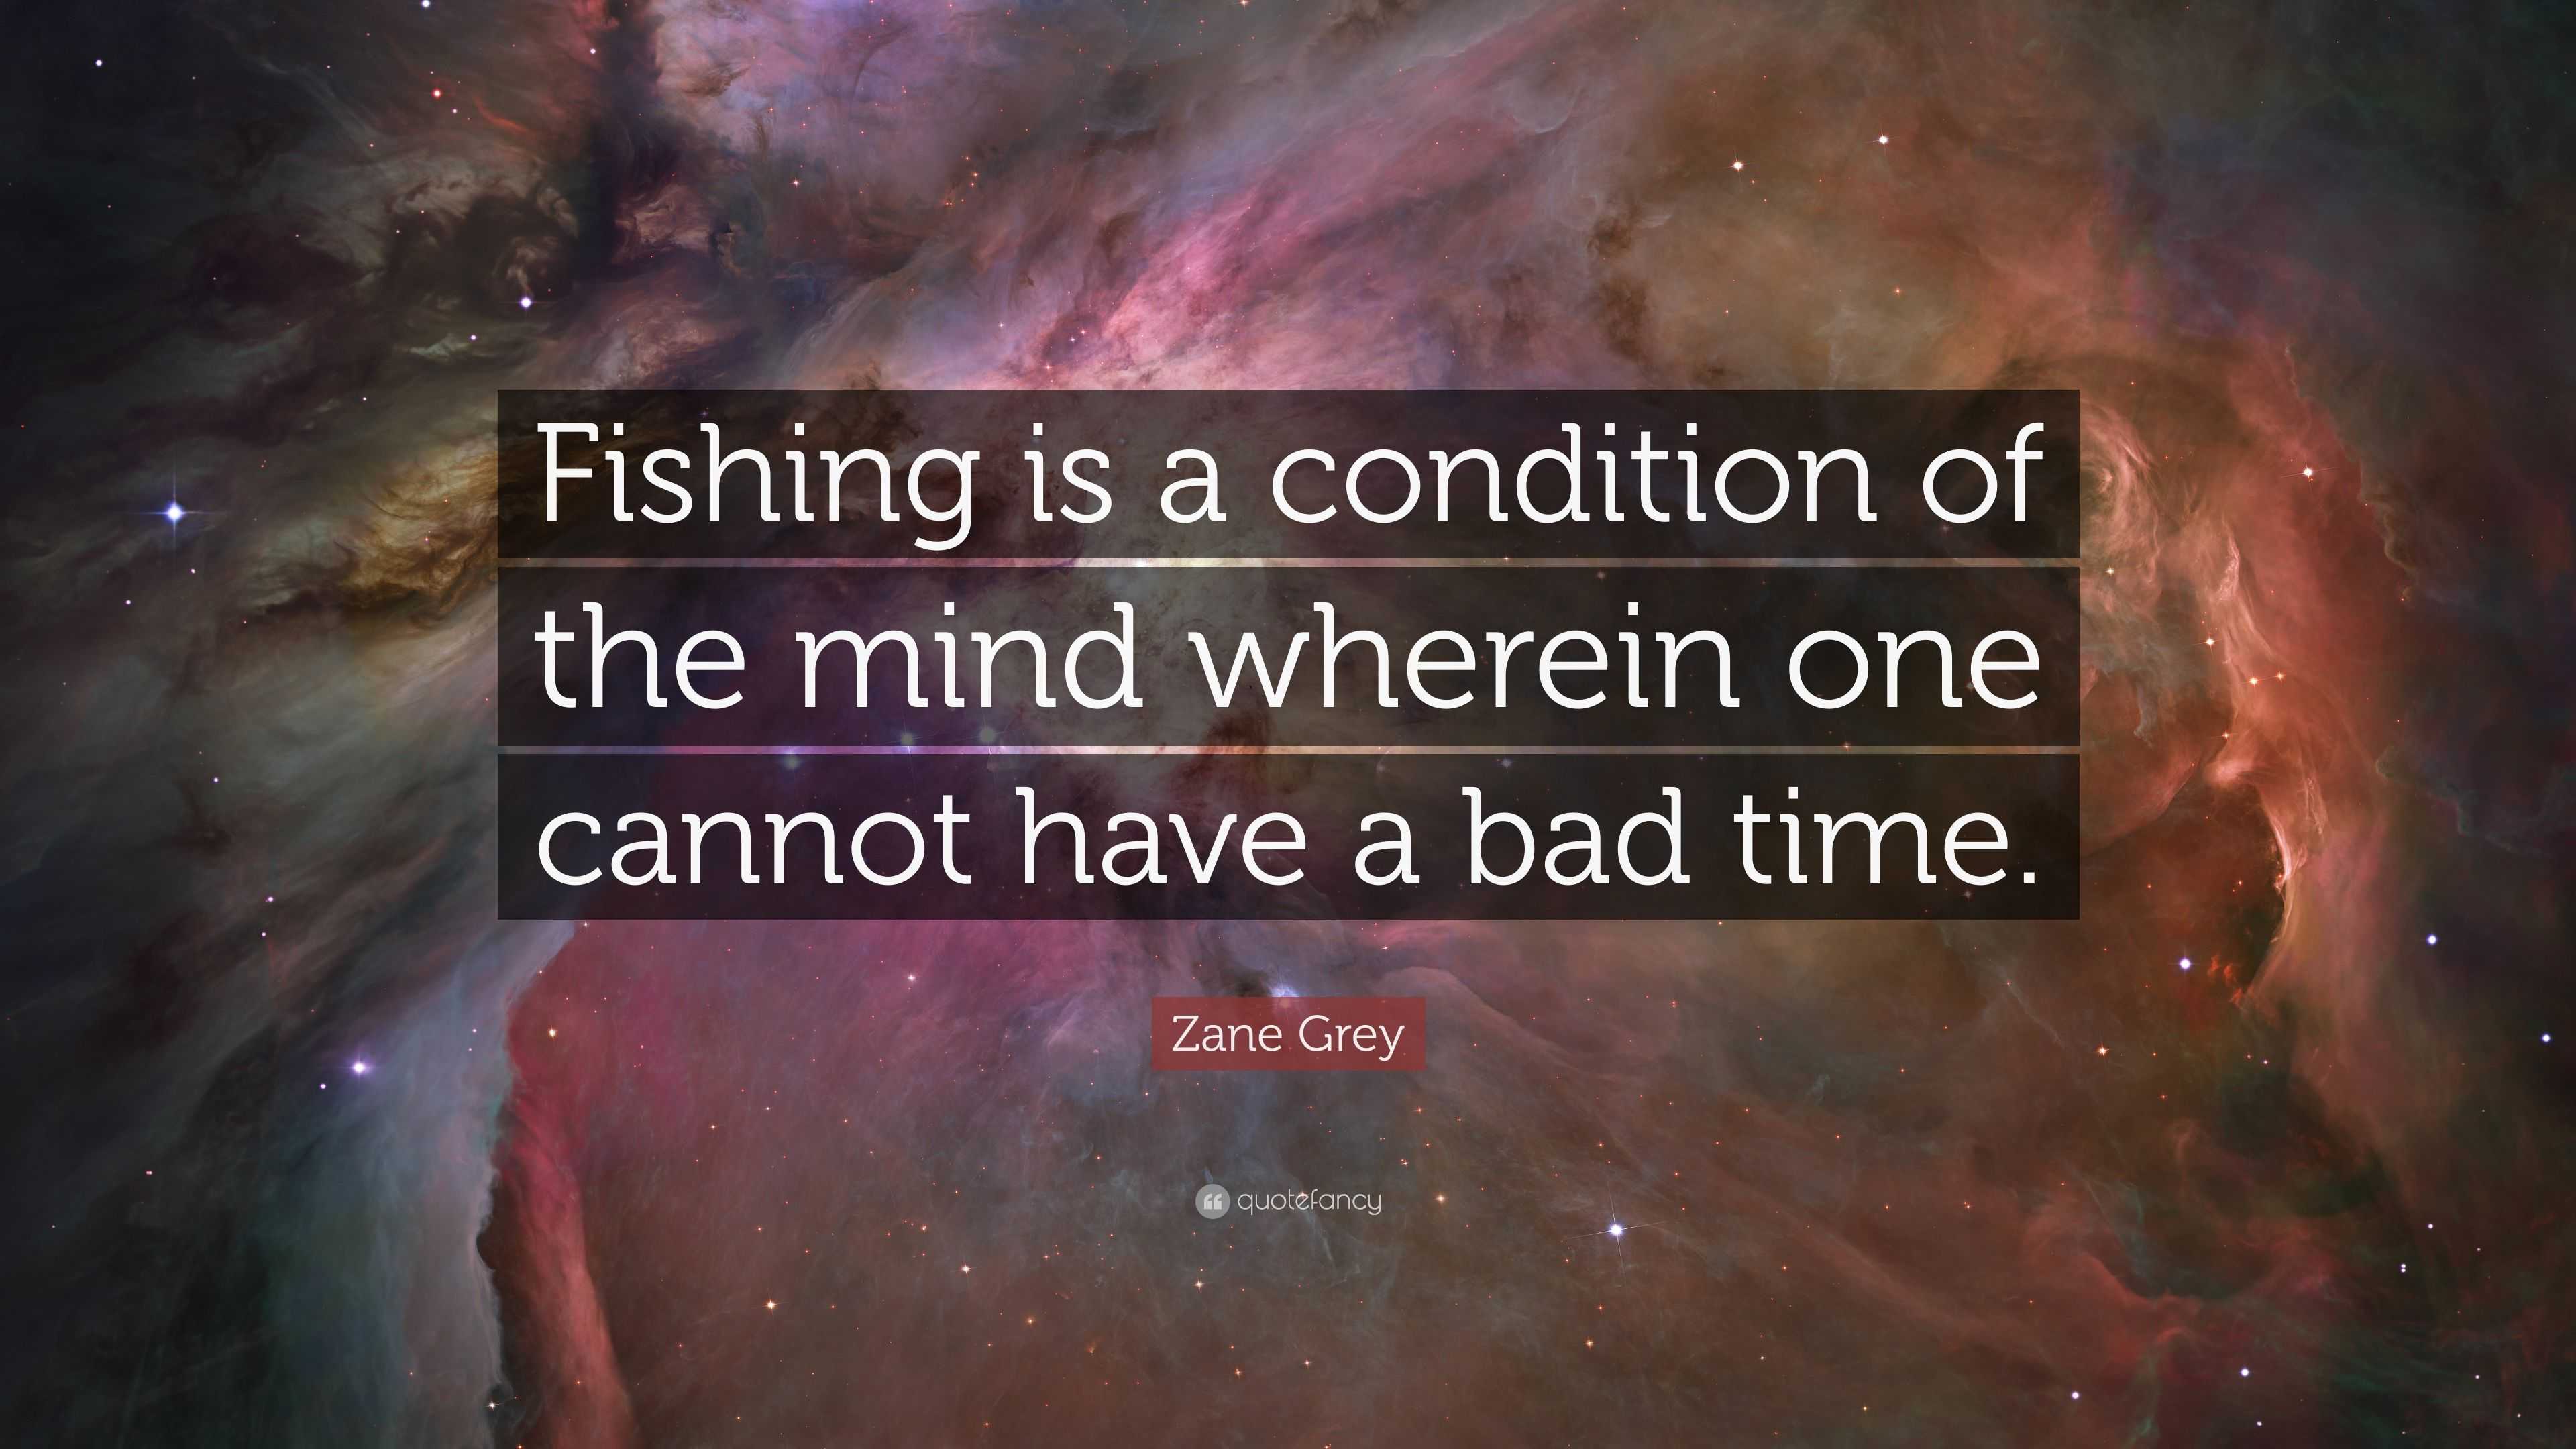 Zane Grey Quote: “Fishing is a condition of the mind wherein one cannot  have a bad